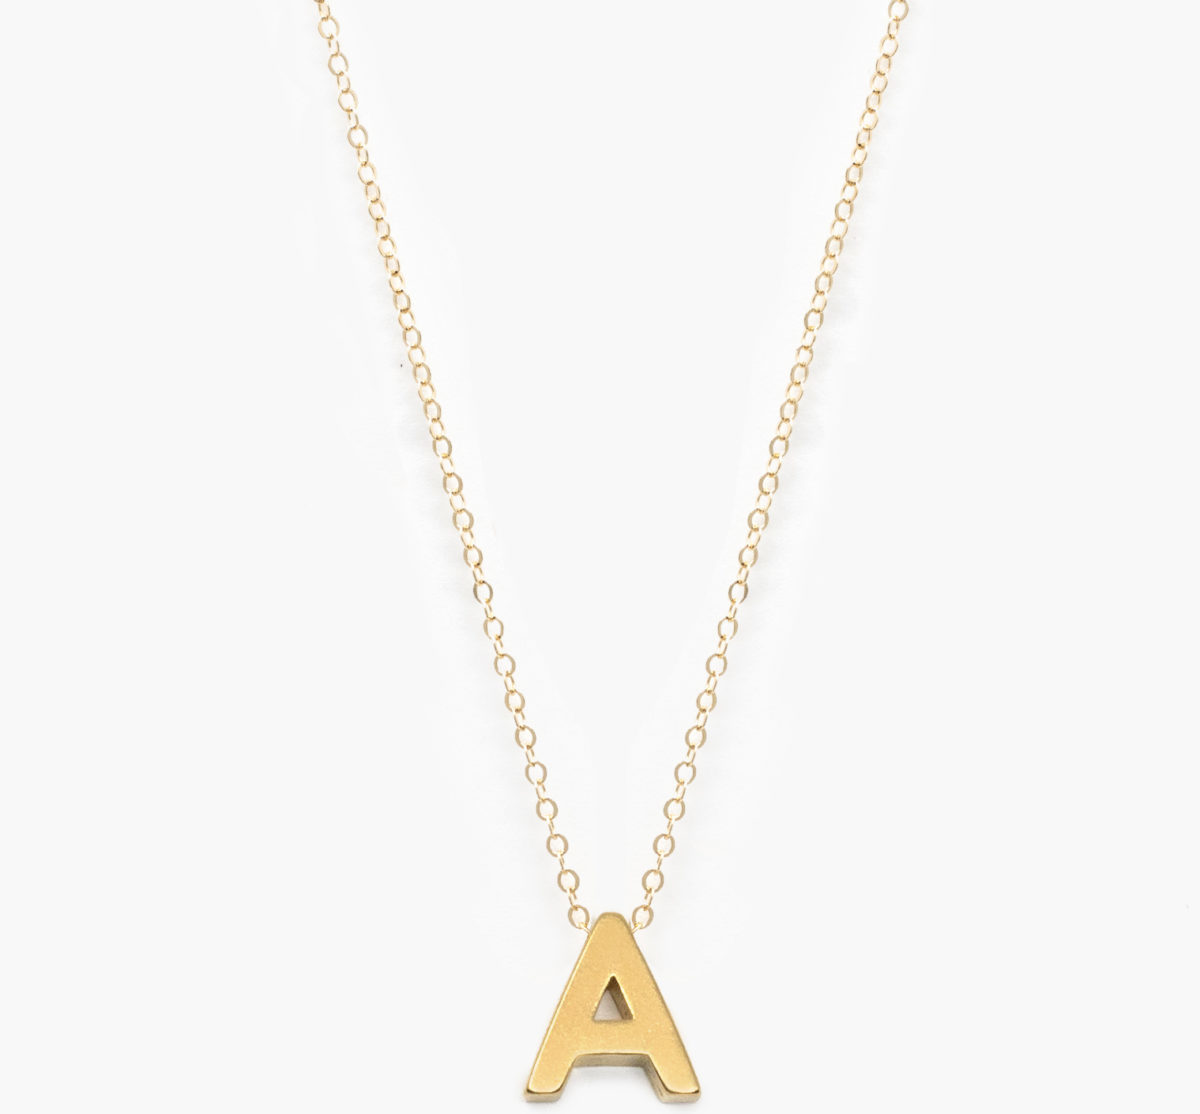 An "A" letter necklace